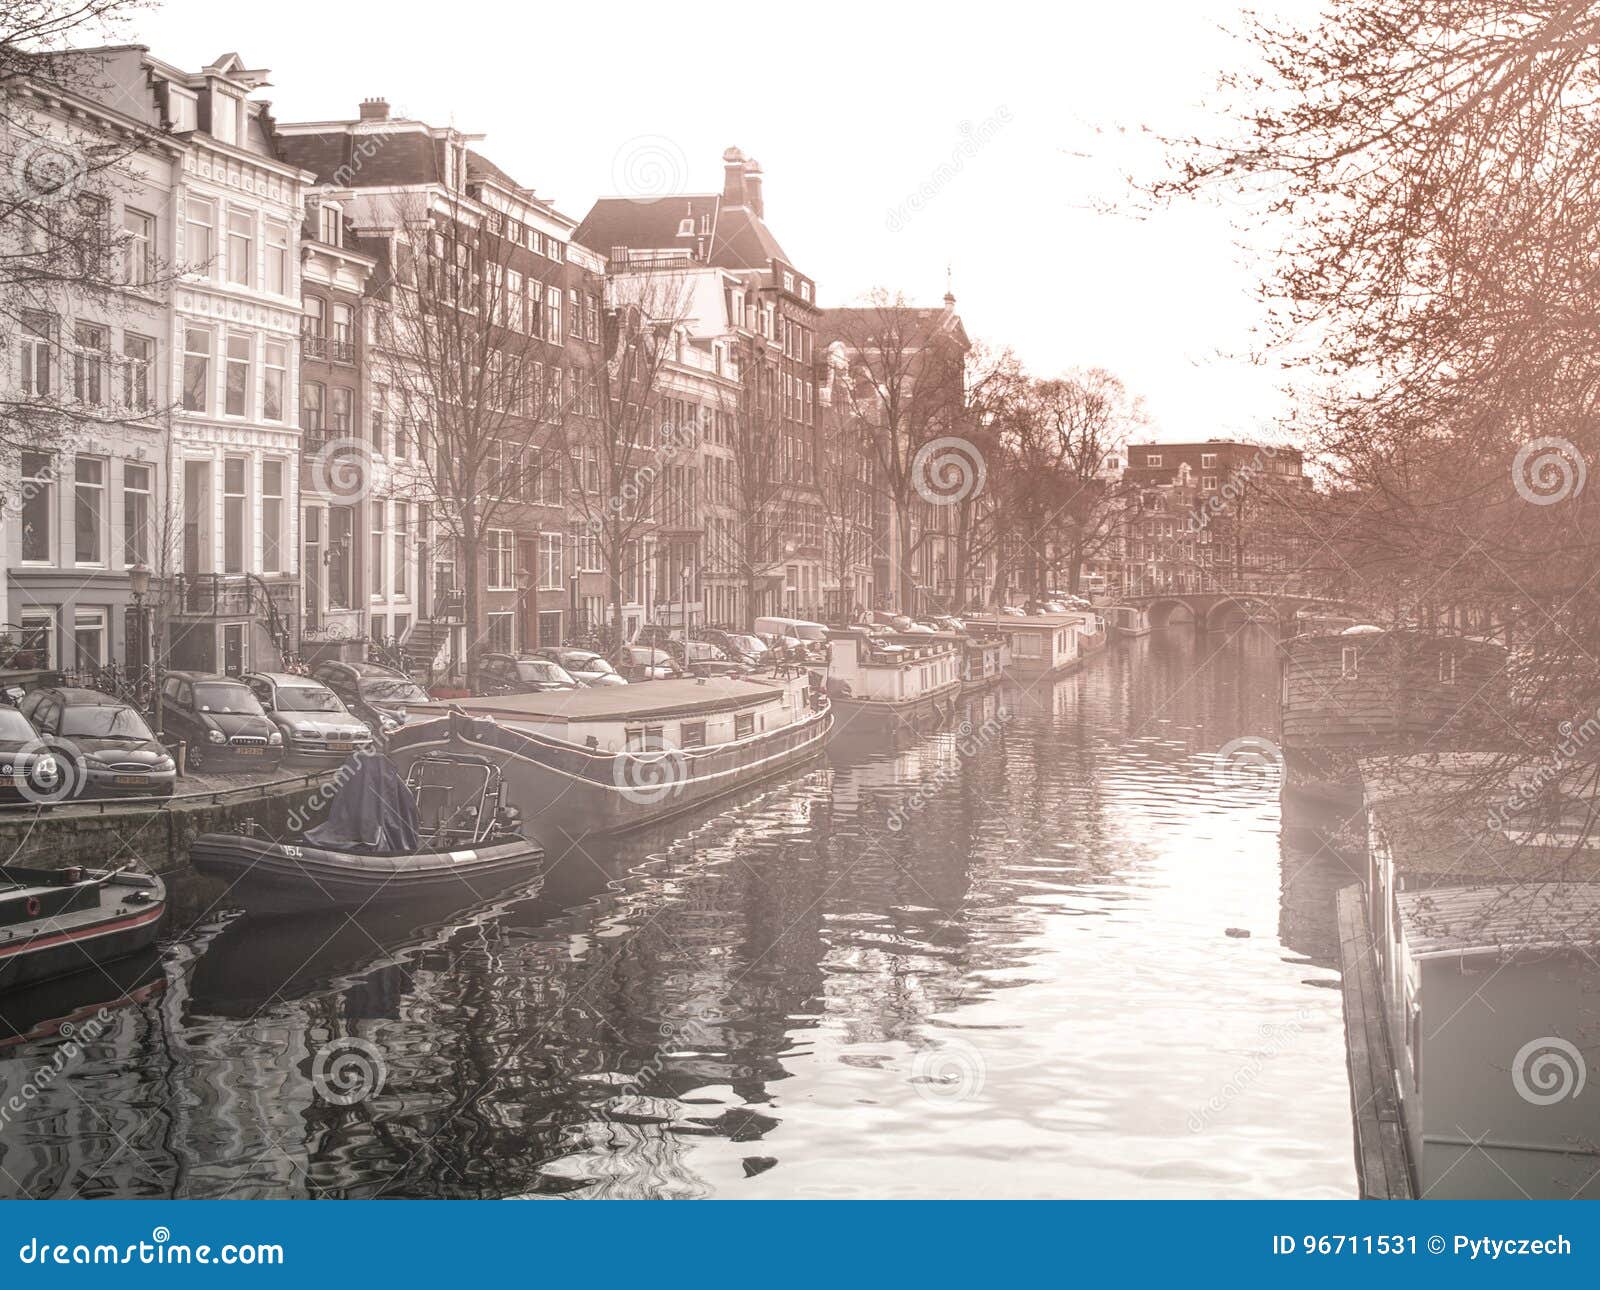 morning haze at water canal, gracht, in amsterdam, netherlands.